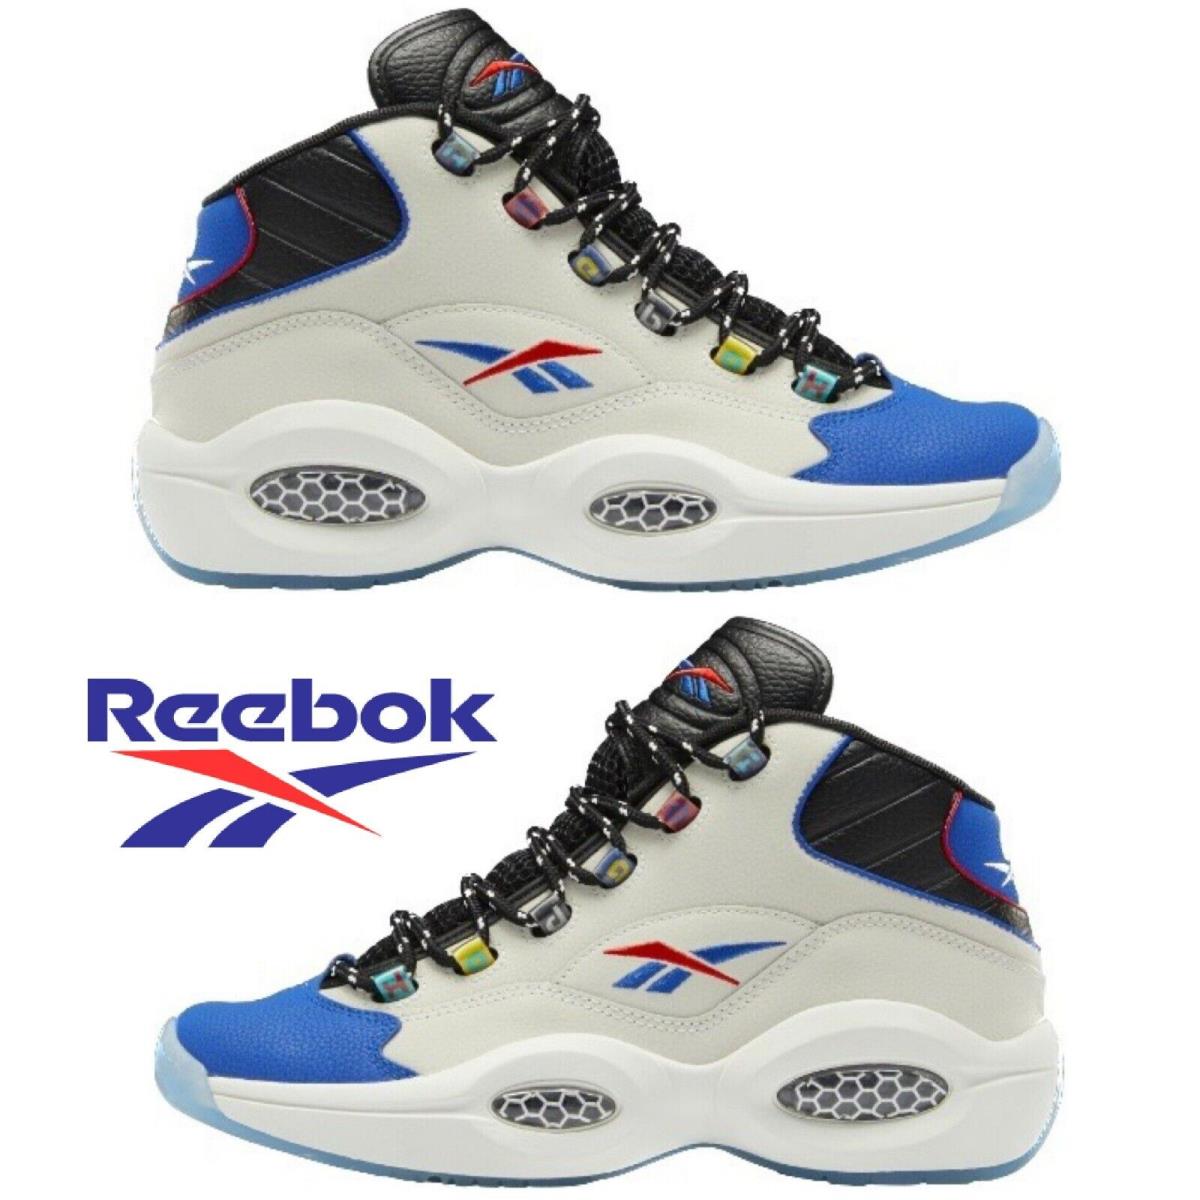 Reebok Question Mid Basketball Shoes Men`s Sneakers Running Casual Sport - White , White/Blue Manufacturer